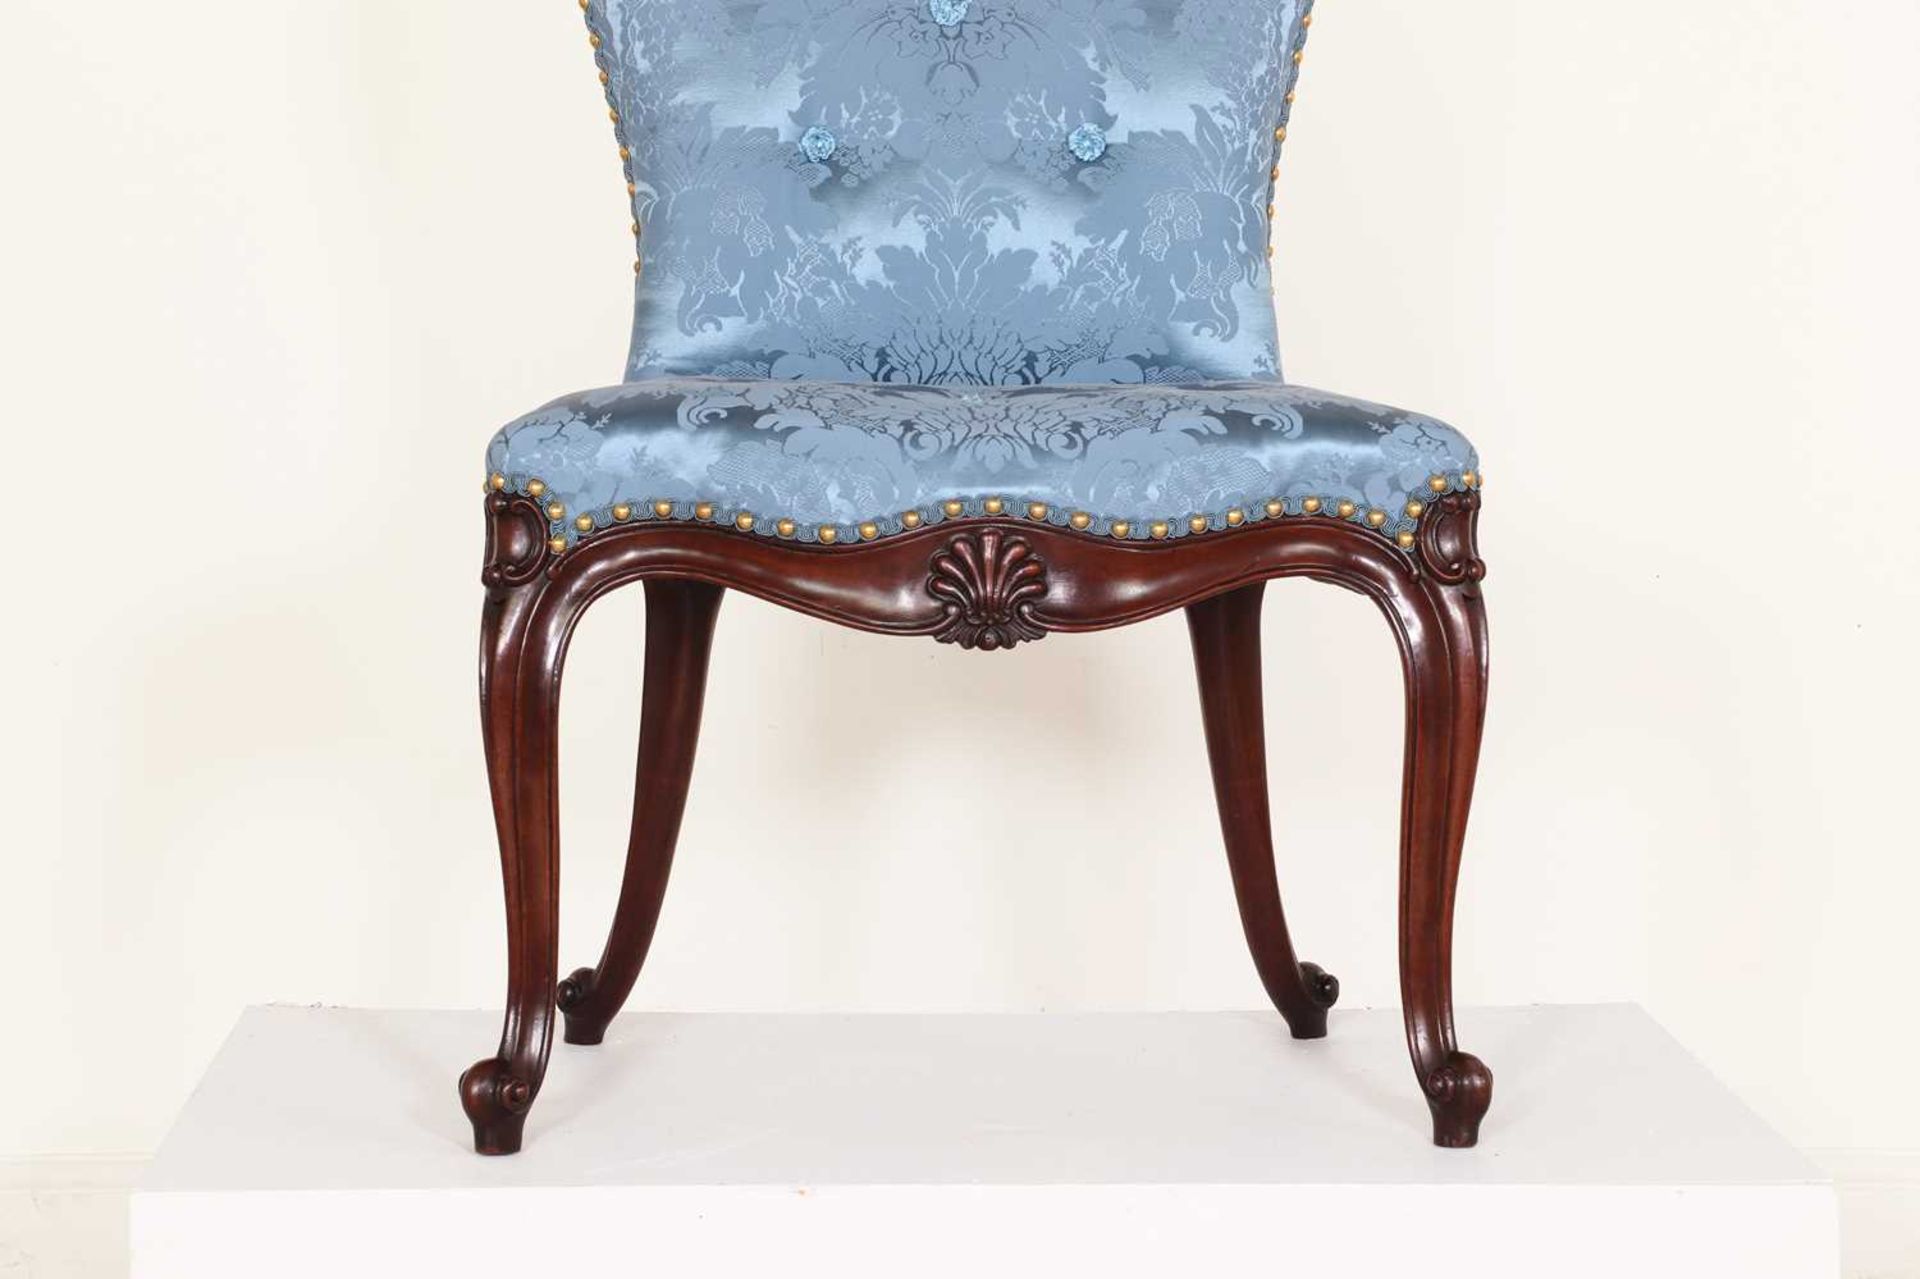 A George III mahogany side chair attributed to Thomas Chippendale - Image 10 of 53